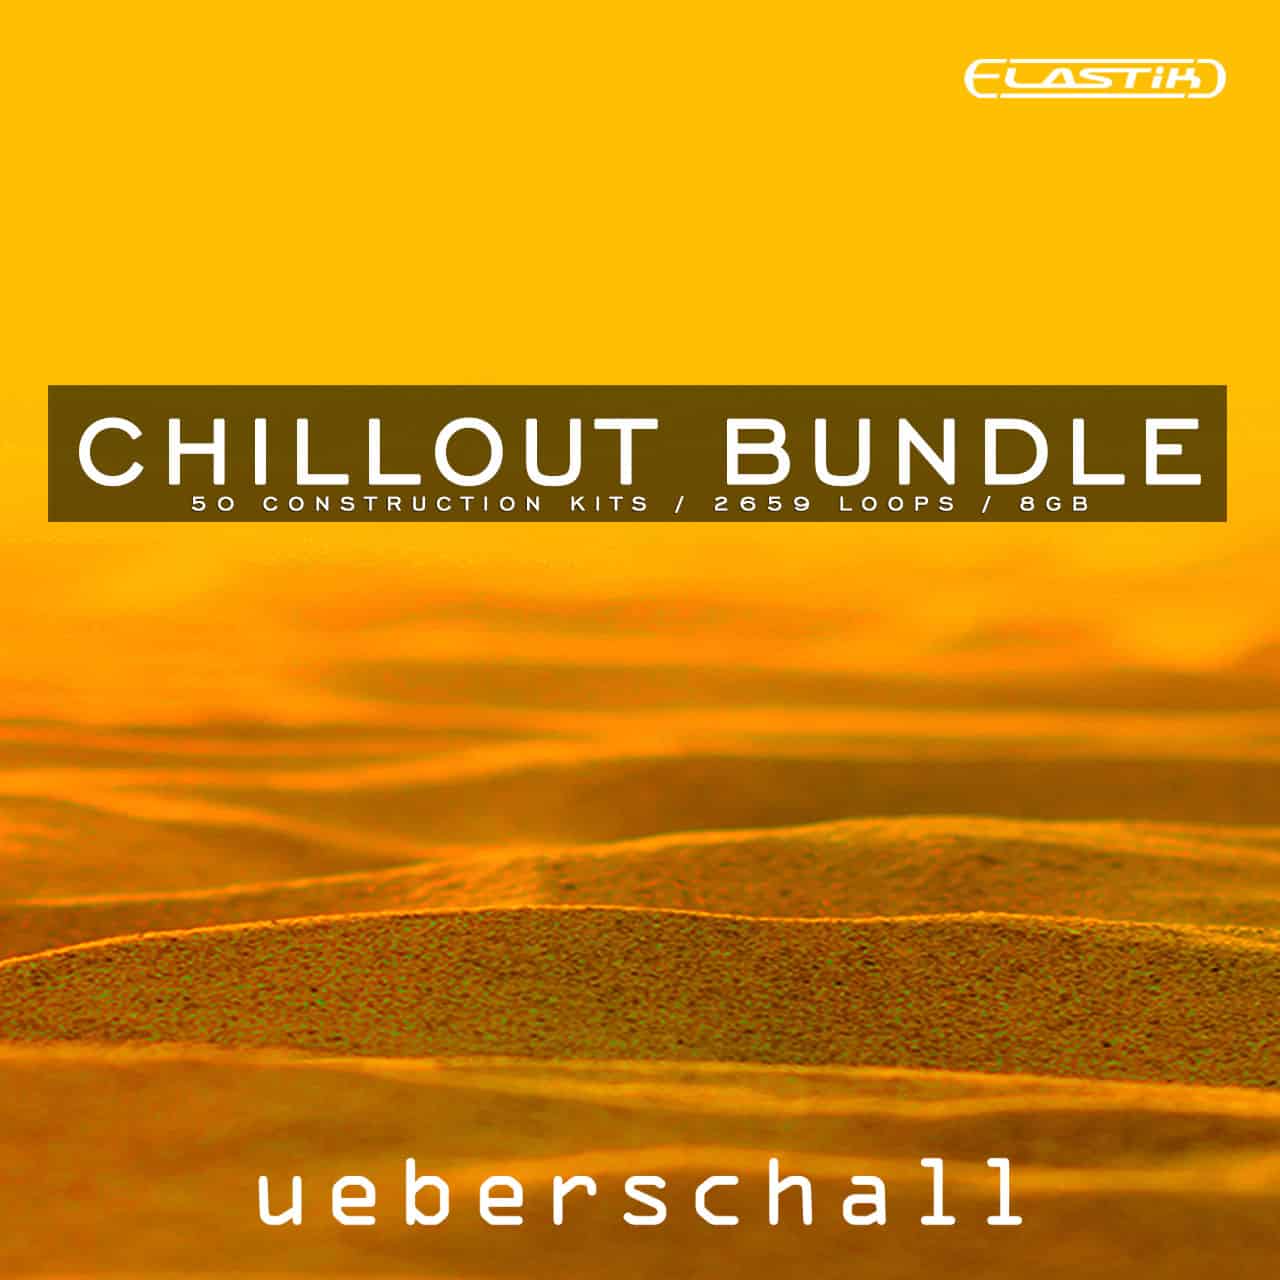 Chillout Bundle by Ueberschall - The Sample Meisters from Germany